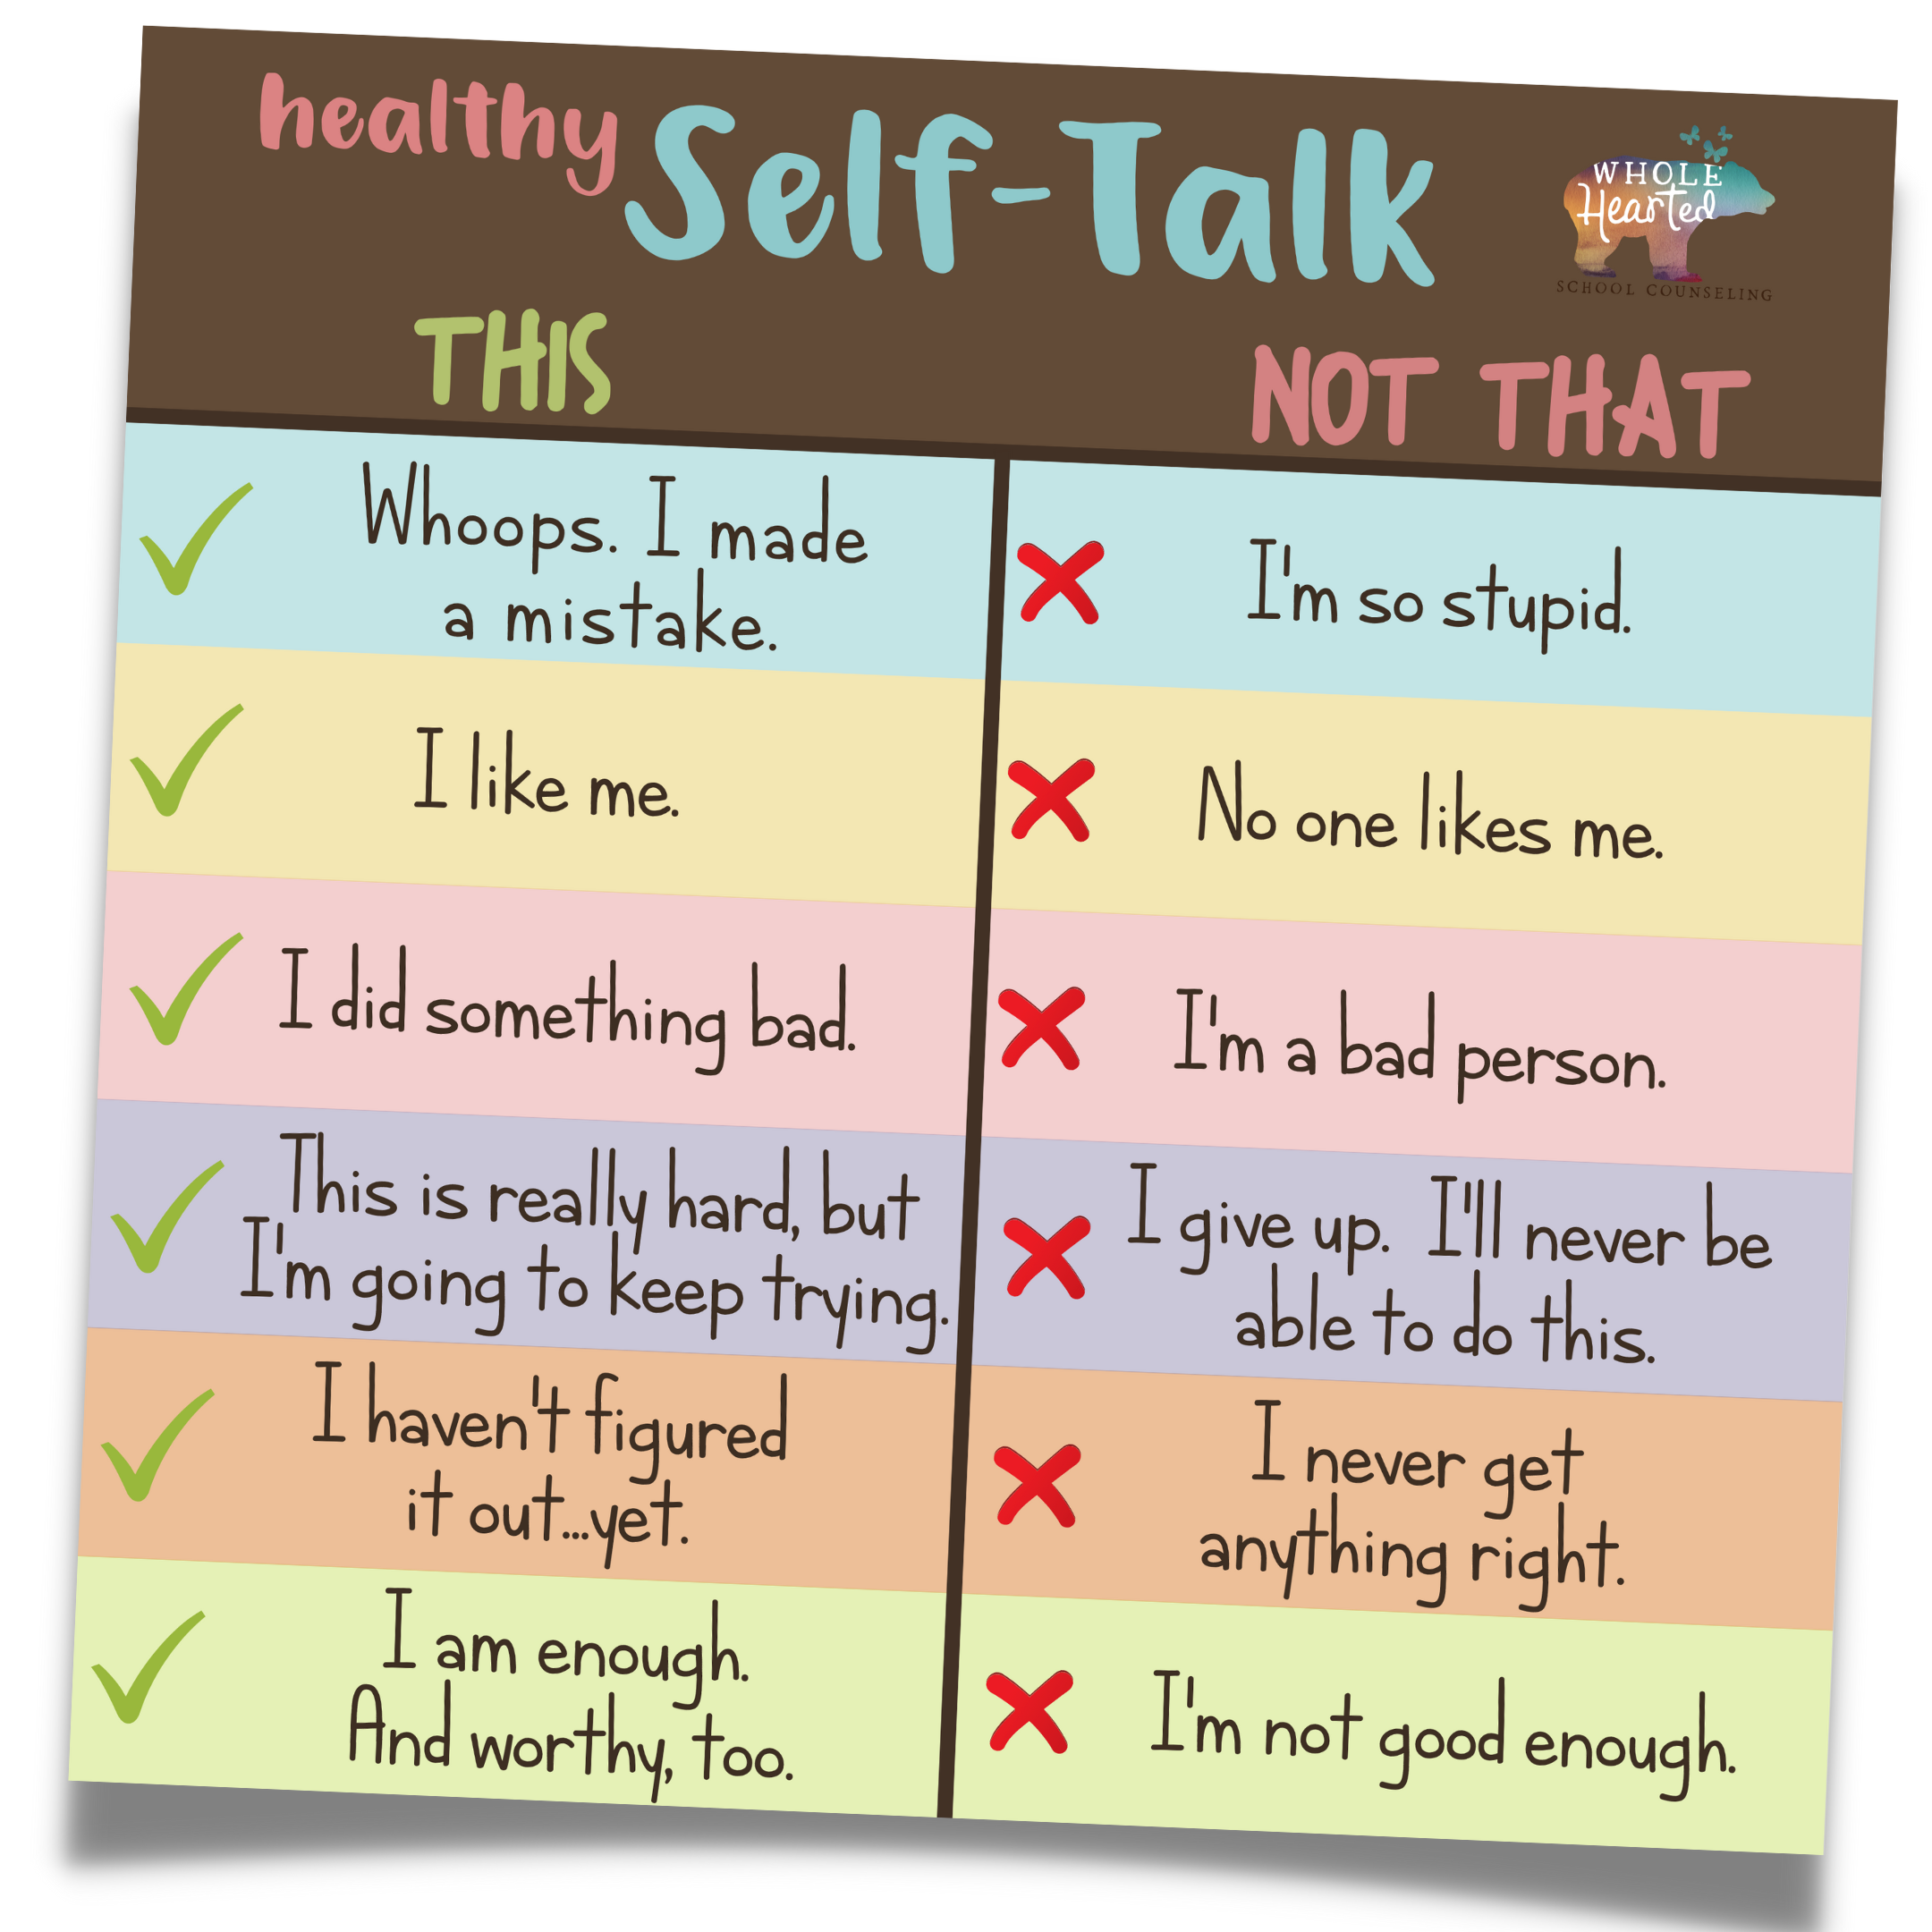 Reframing your Self-Talk from Negative to Positive